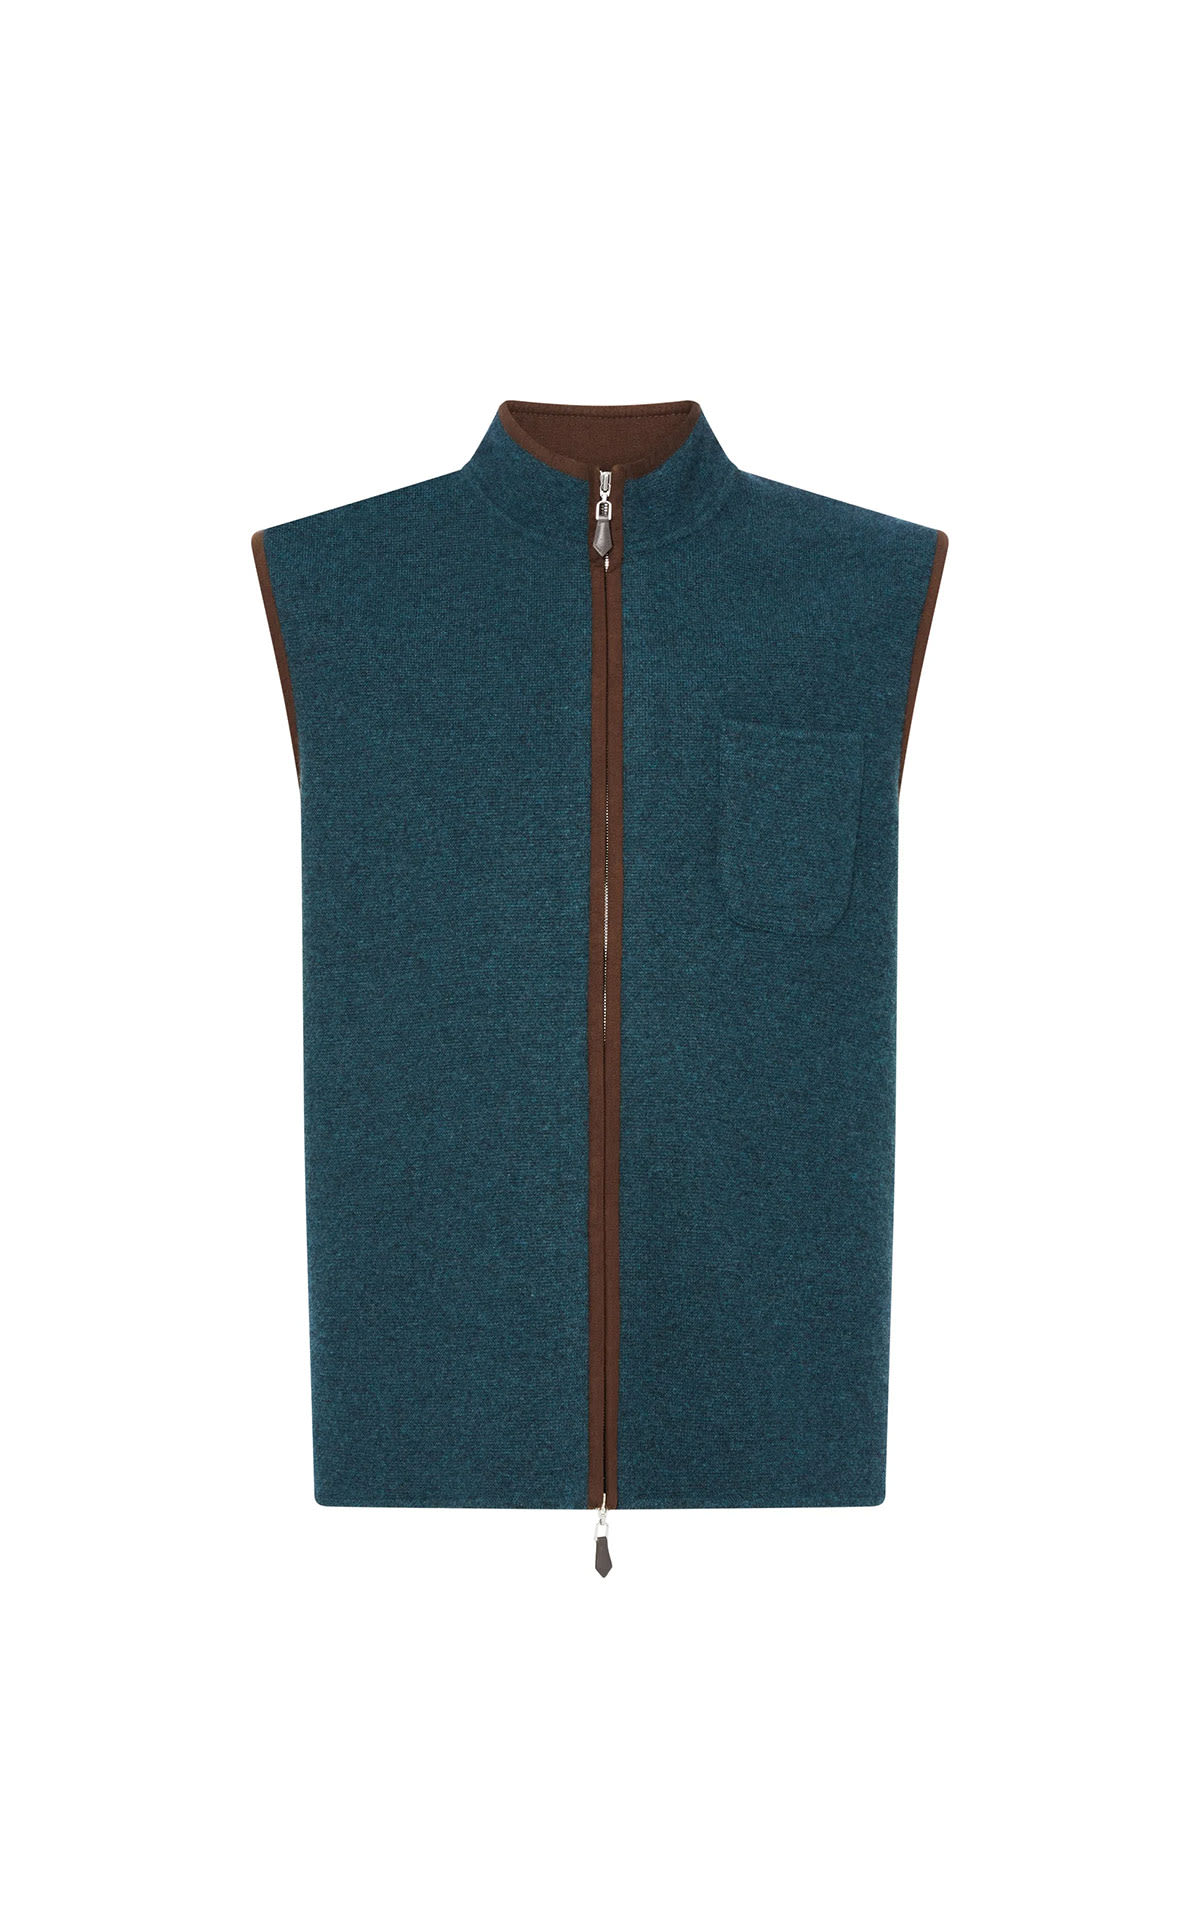 N. Peal Milano suede trim cashmere gilet from Bicester Village